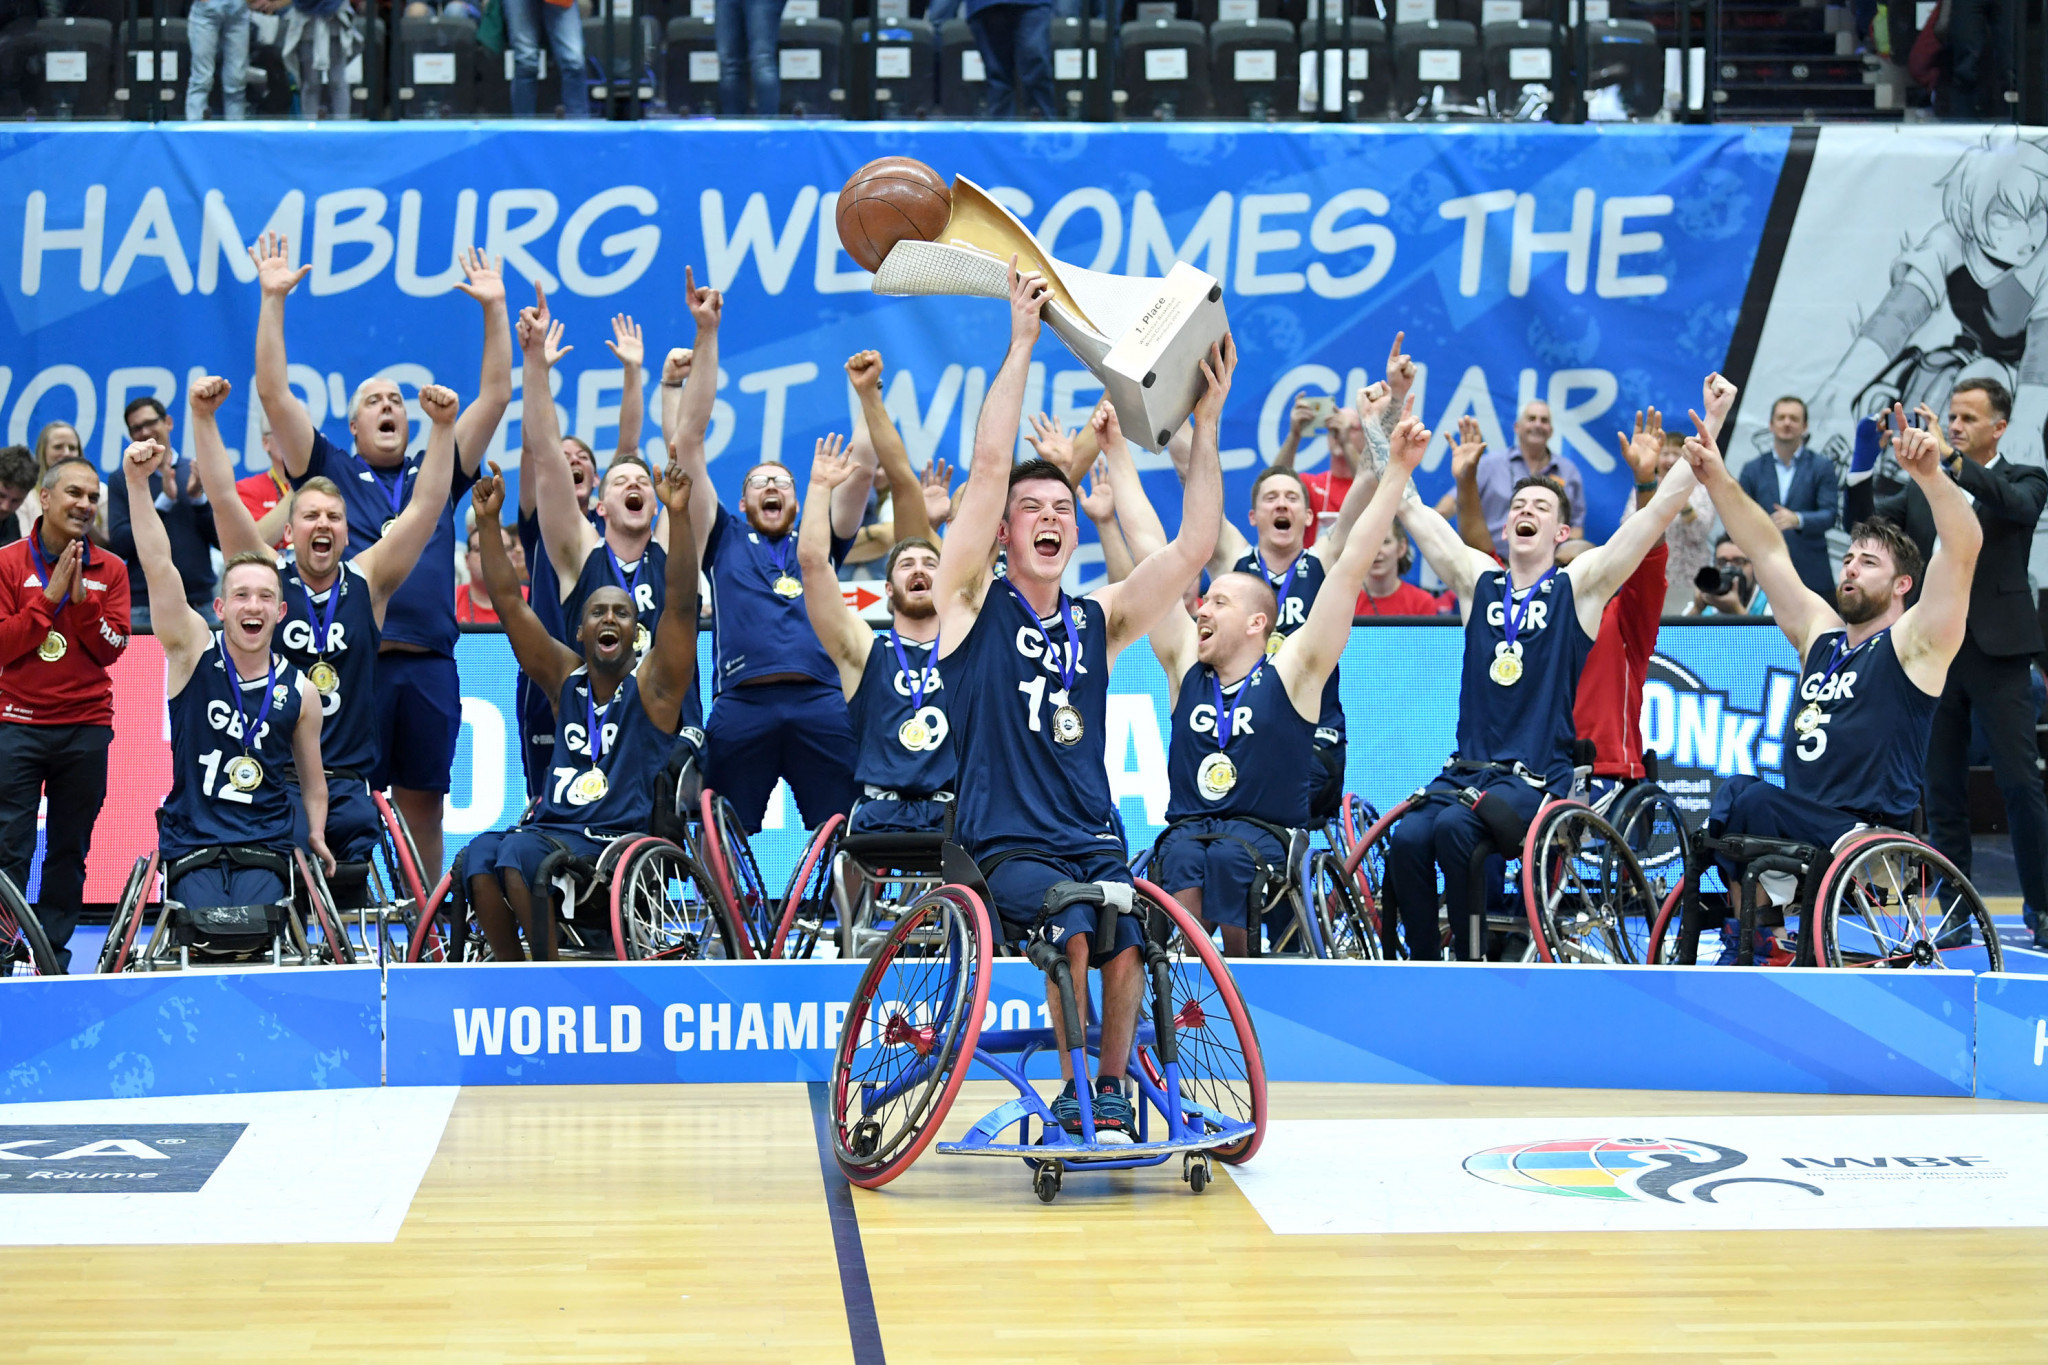 British Wheelchair Basketball hopes to form a Great Britain academy to ensure continued international success after the men's team won the 2018 World Championships in Hamburg ©2018 Wheelchair Basketball World Championships